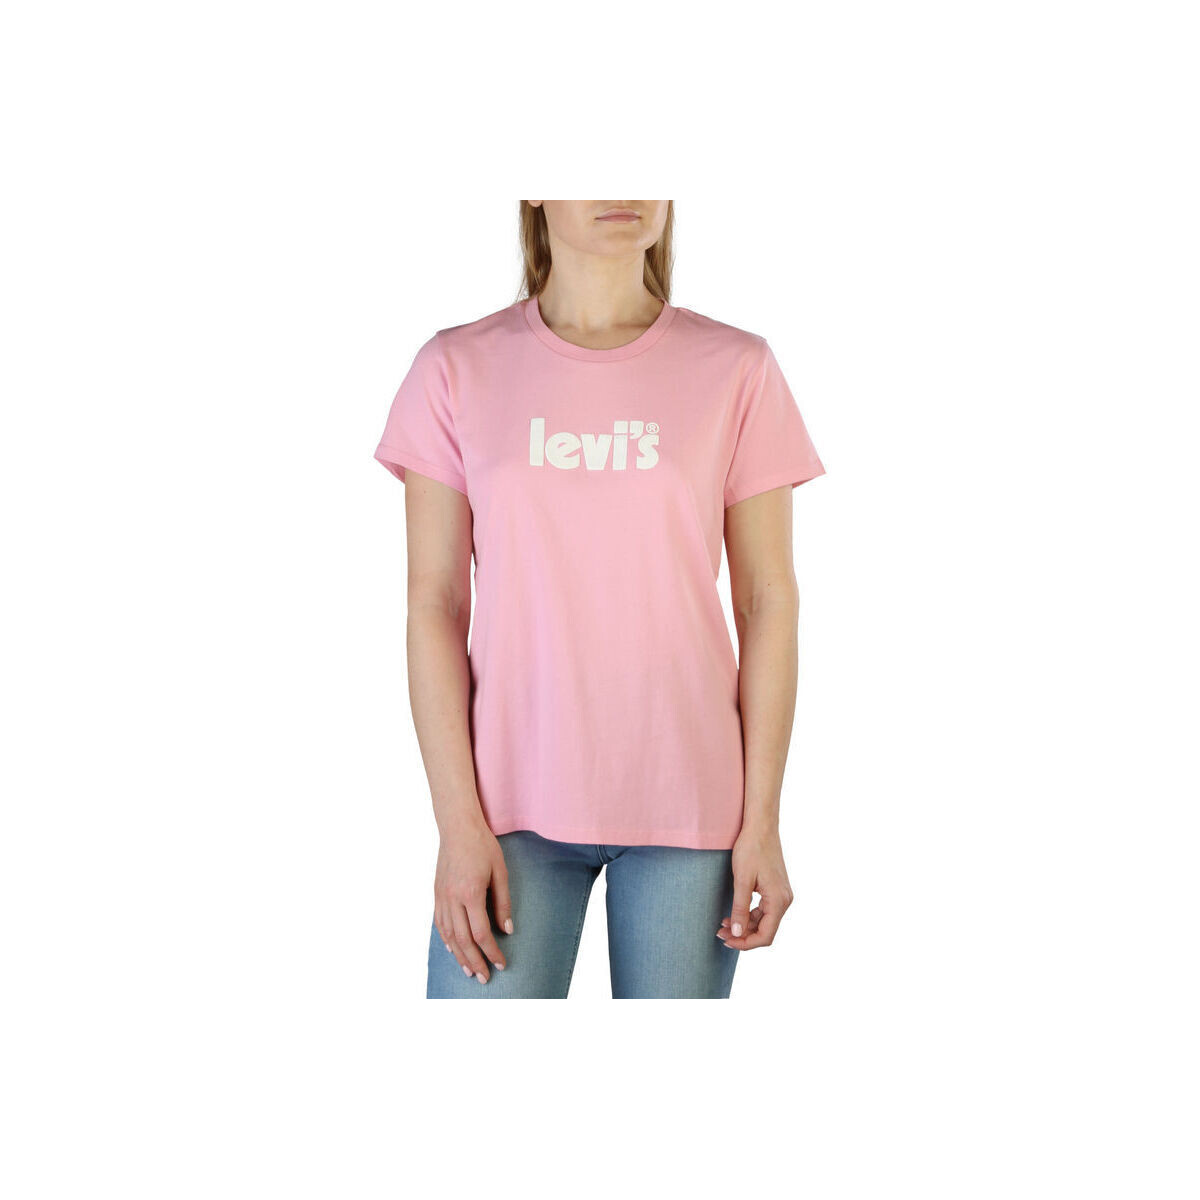 textil Mujer Tops / Blusas Levi's - 17369_the-perfect Rosa